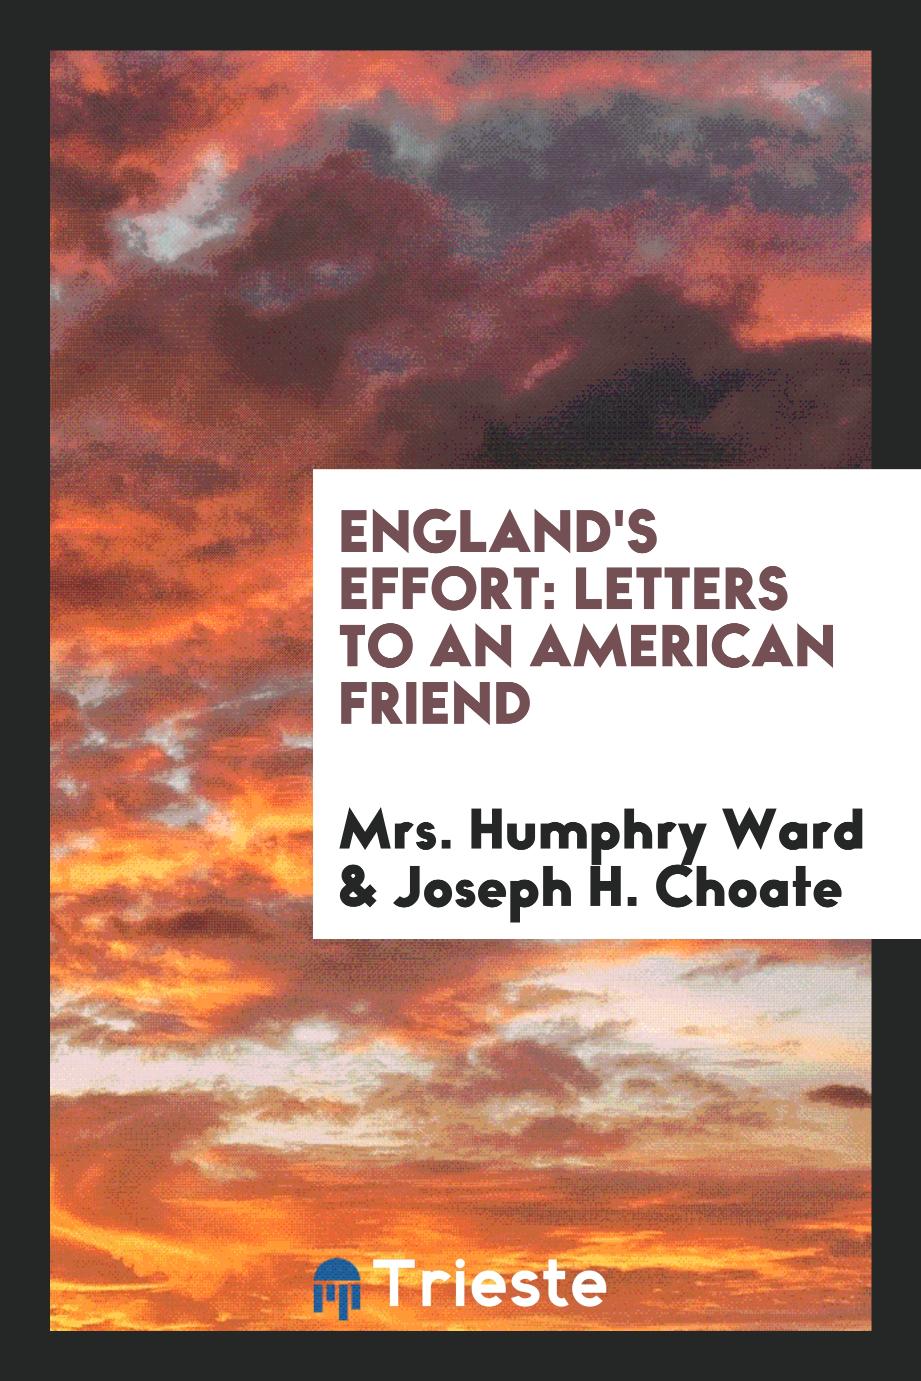 Mrs. Humphry Ward, Joseph H. Choate - England's Effort: Letters to an American Friend